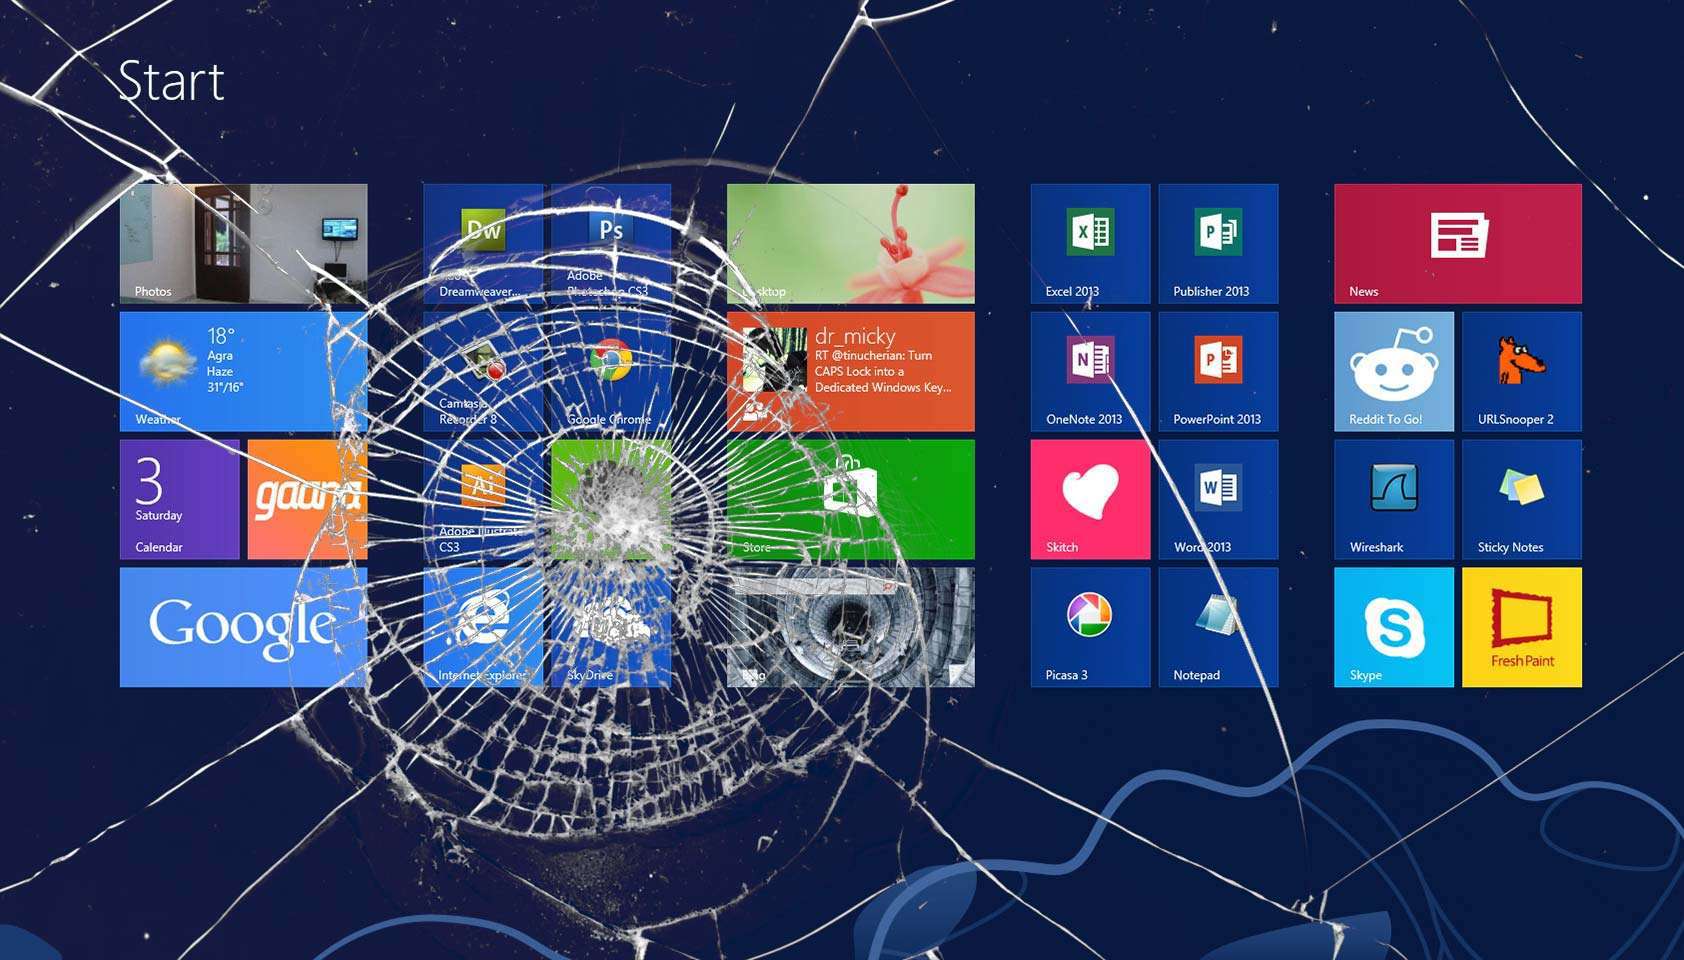 Show Your Support Of Windows With This Cracked Screen Wallpaper